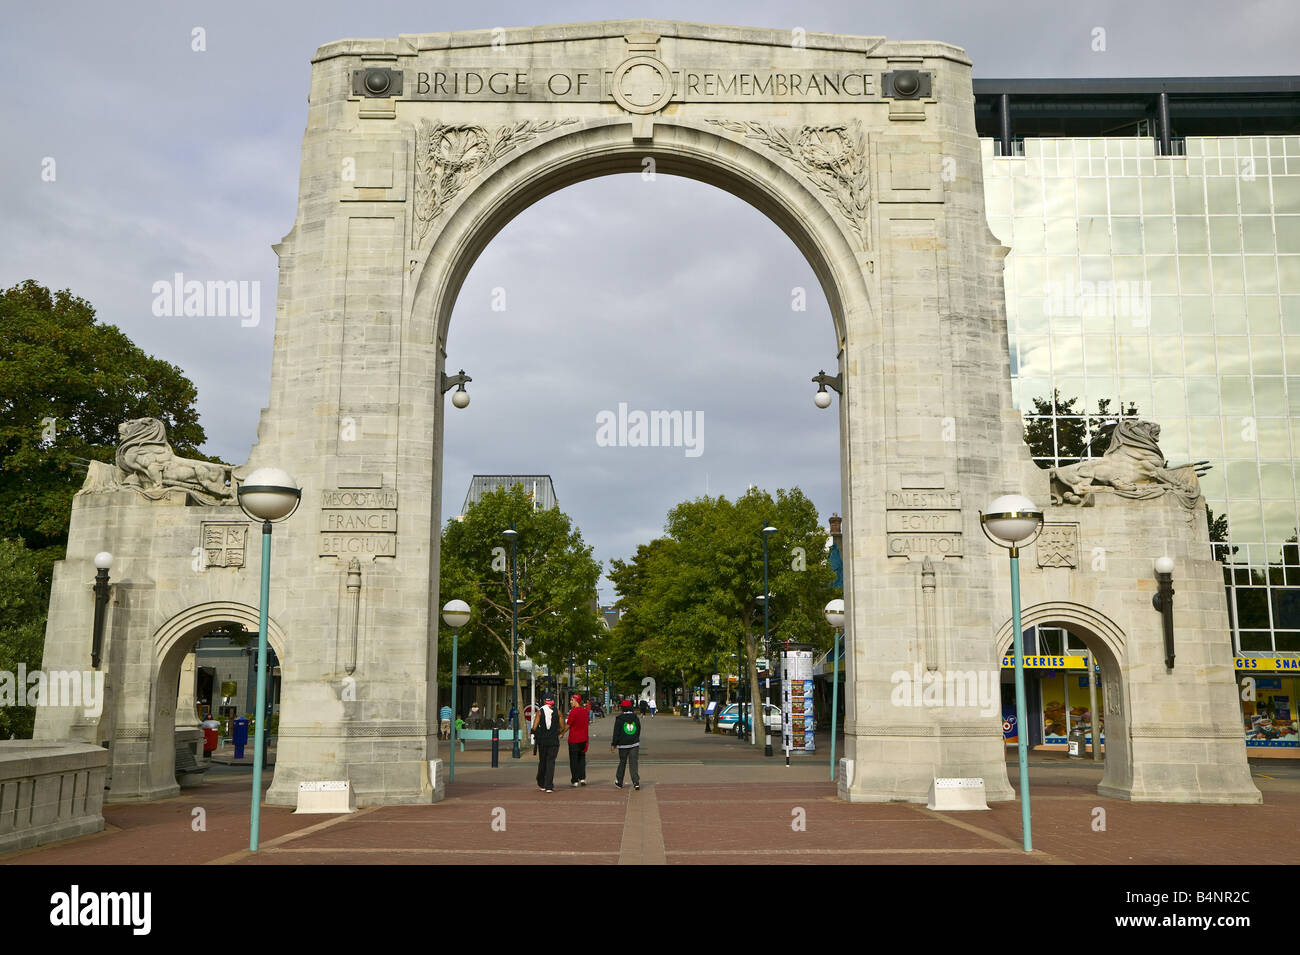 Arches of the Bridge of Rememberance over the RIver Avon, Christchurch, South Island, New Zealand. Looking into The Mall. Stock Photo